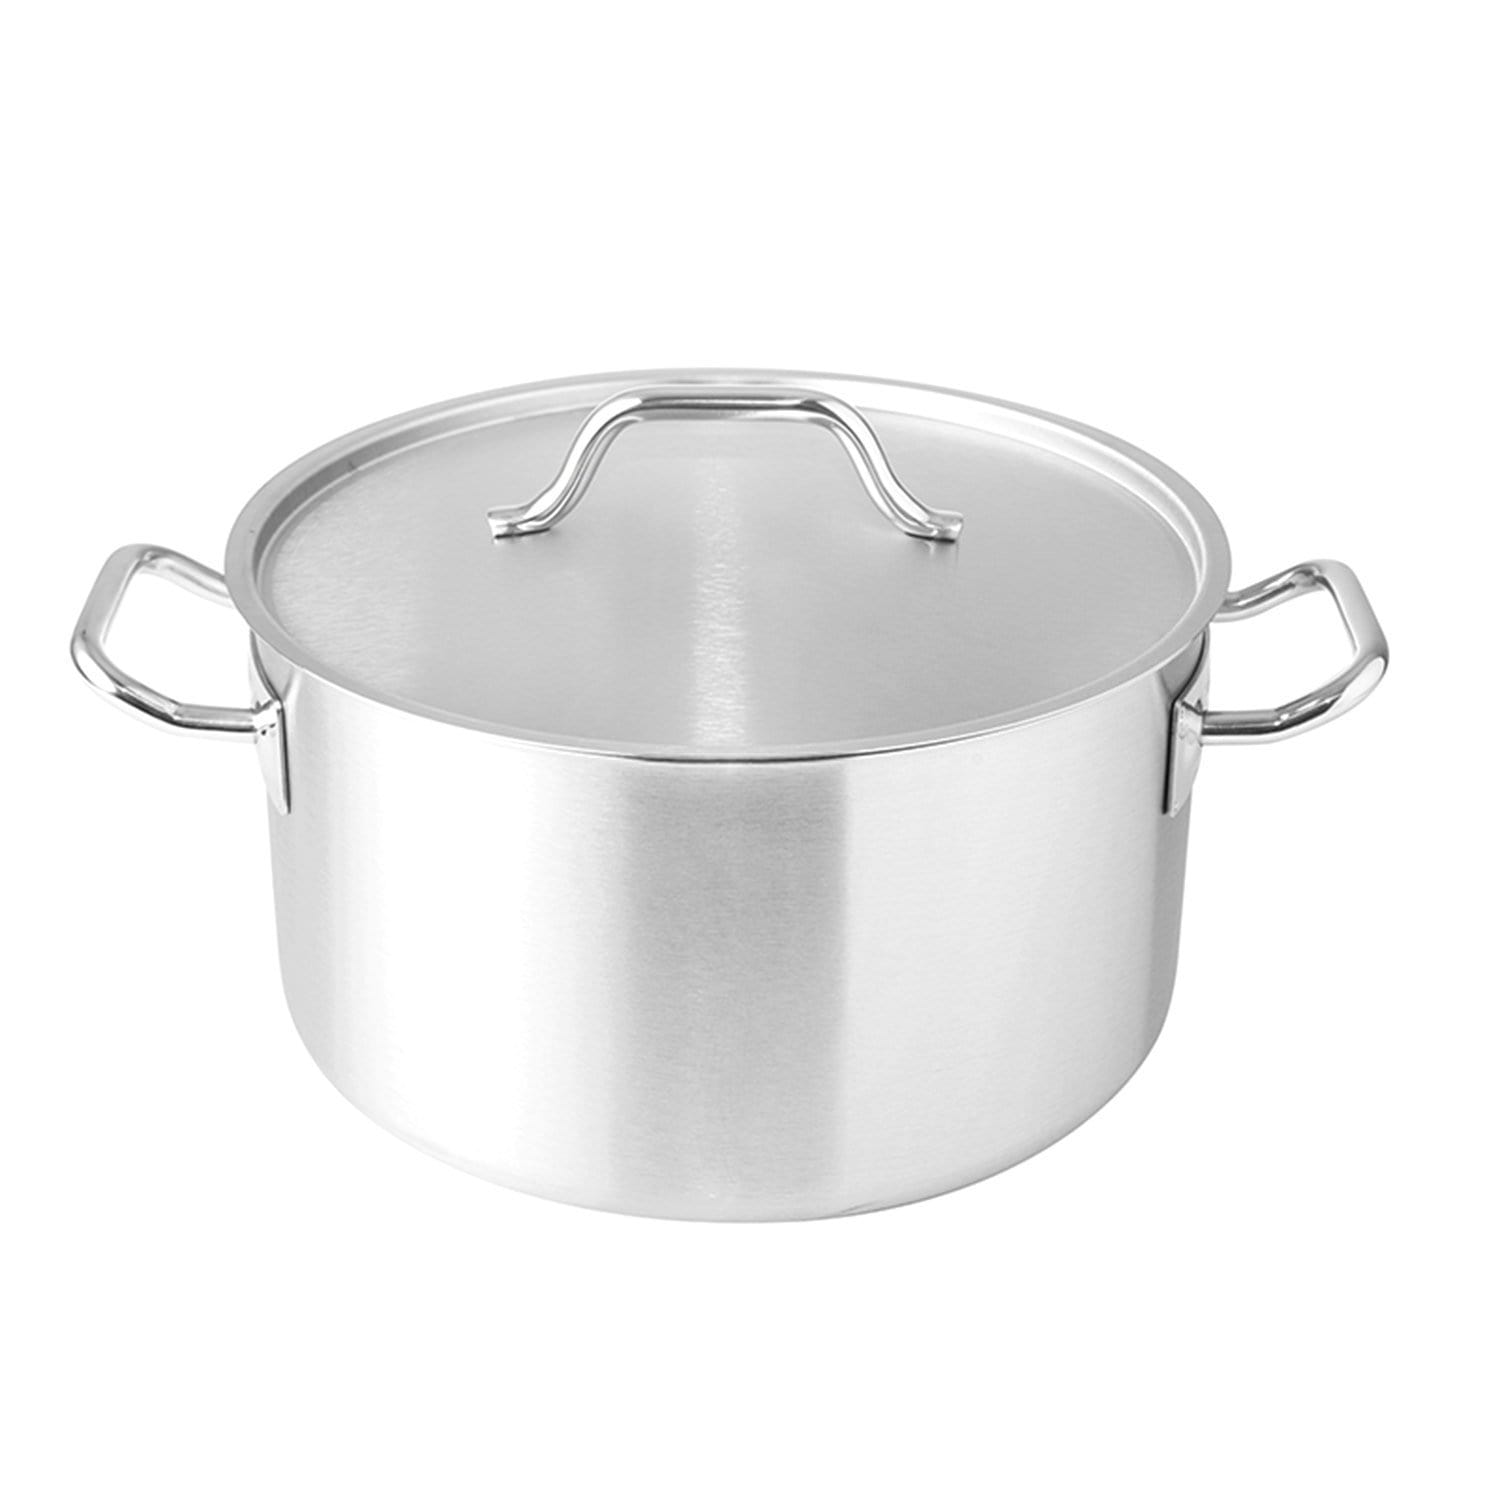 Silampos Deep Casserole with Lid - Silver, 40 cm - 638221BB2940 - Jashanmal Home